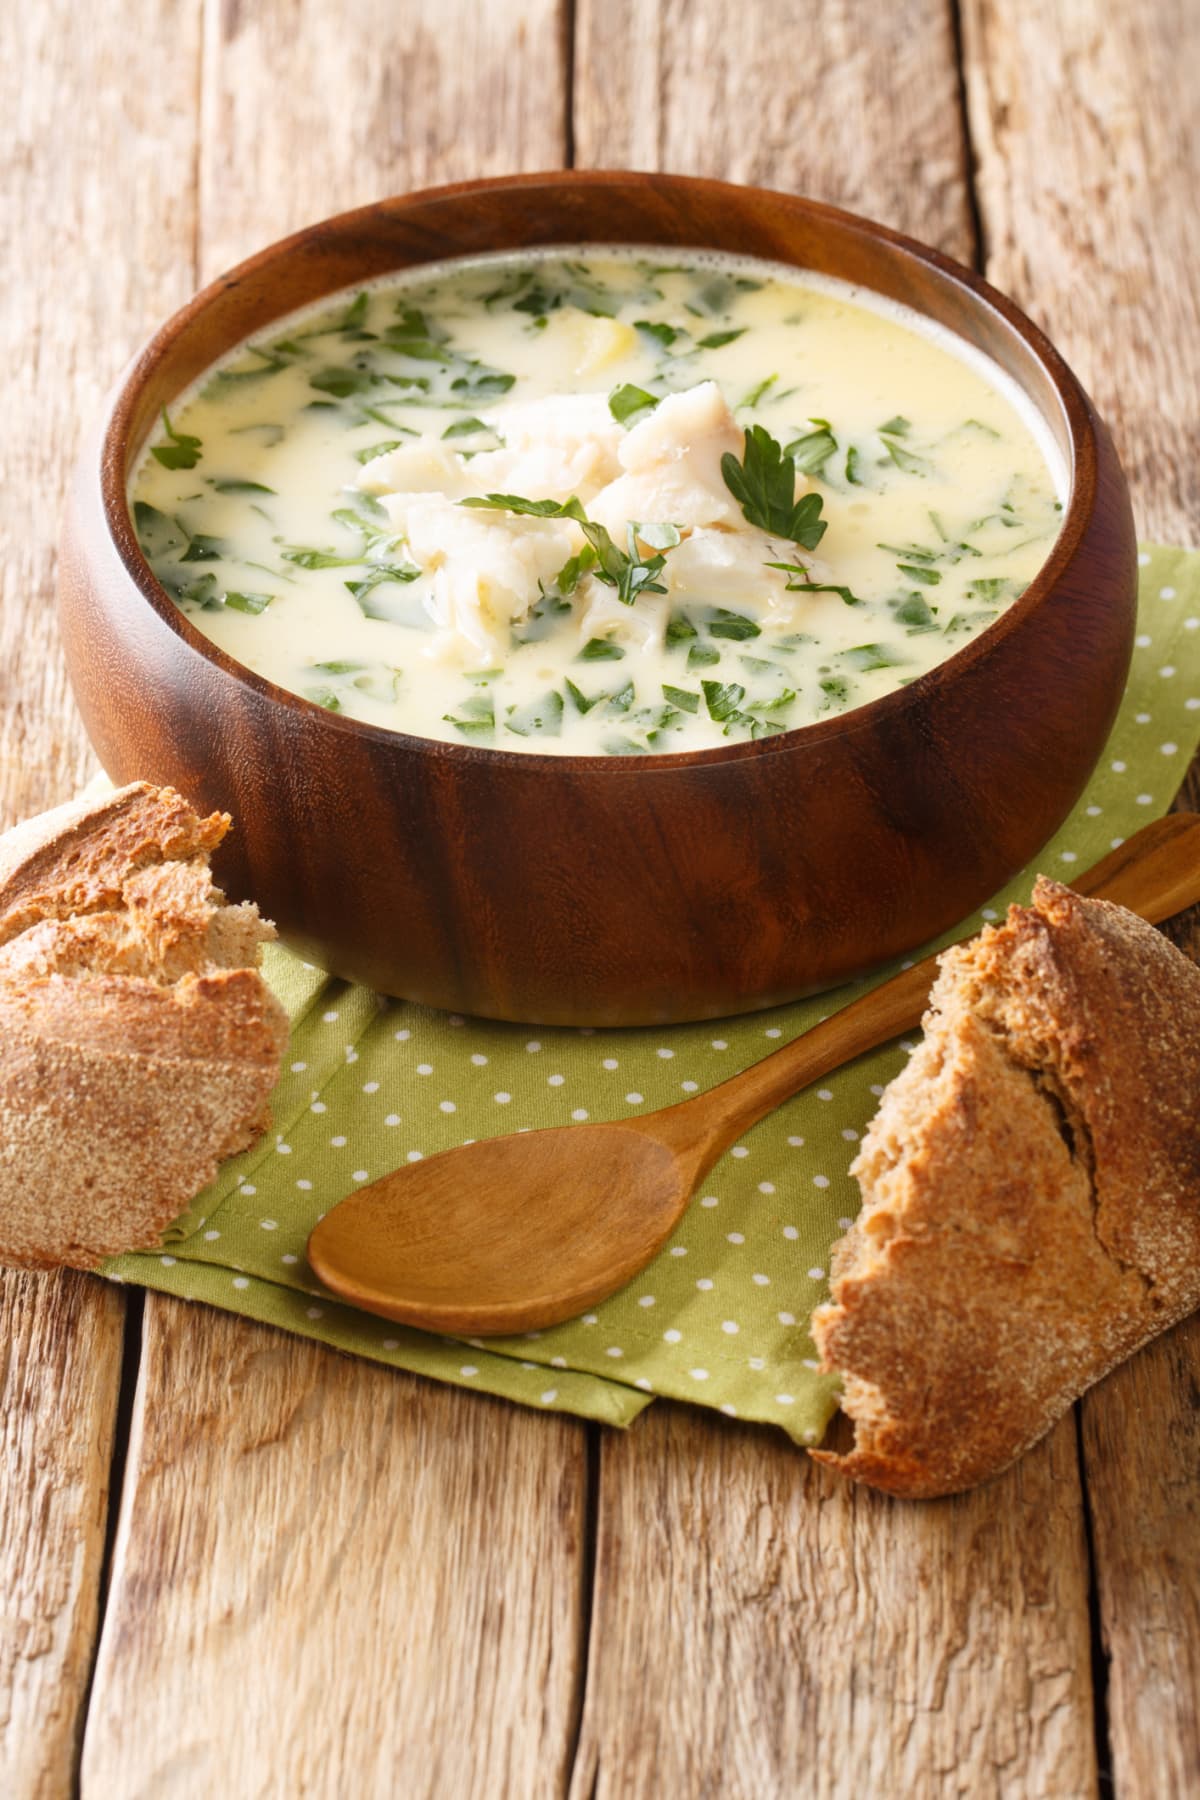 cullen skink, traditional scottish soup made of smoked haddock, potatoes and onions